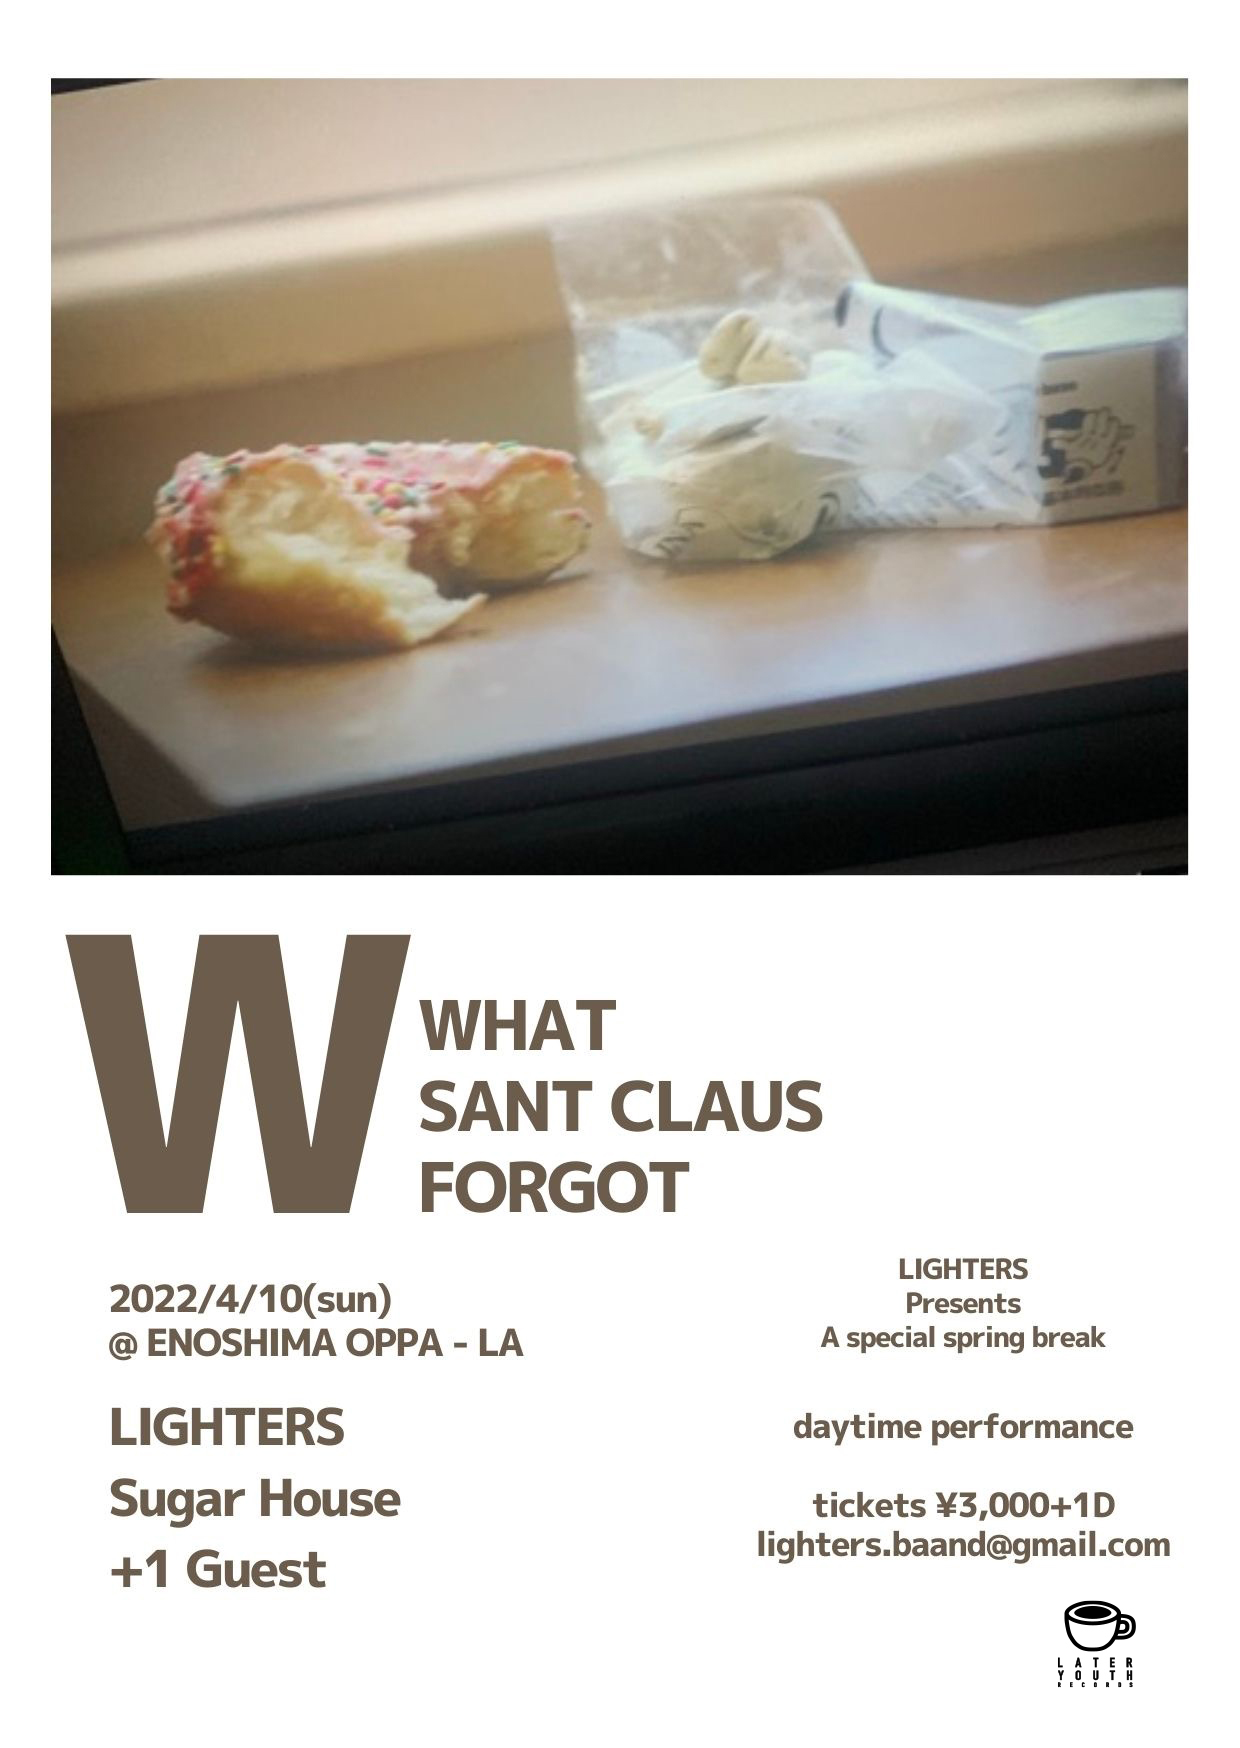 『WHAT SANT CLAUS FORGOT』